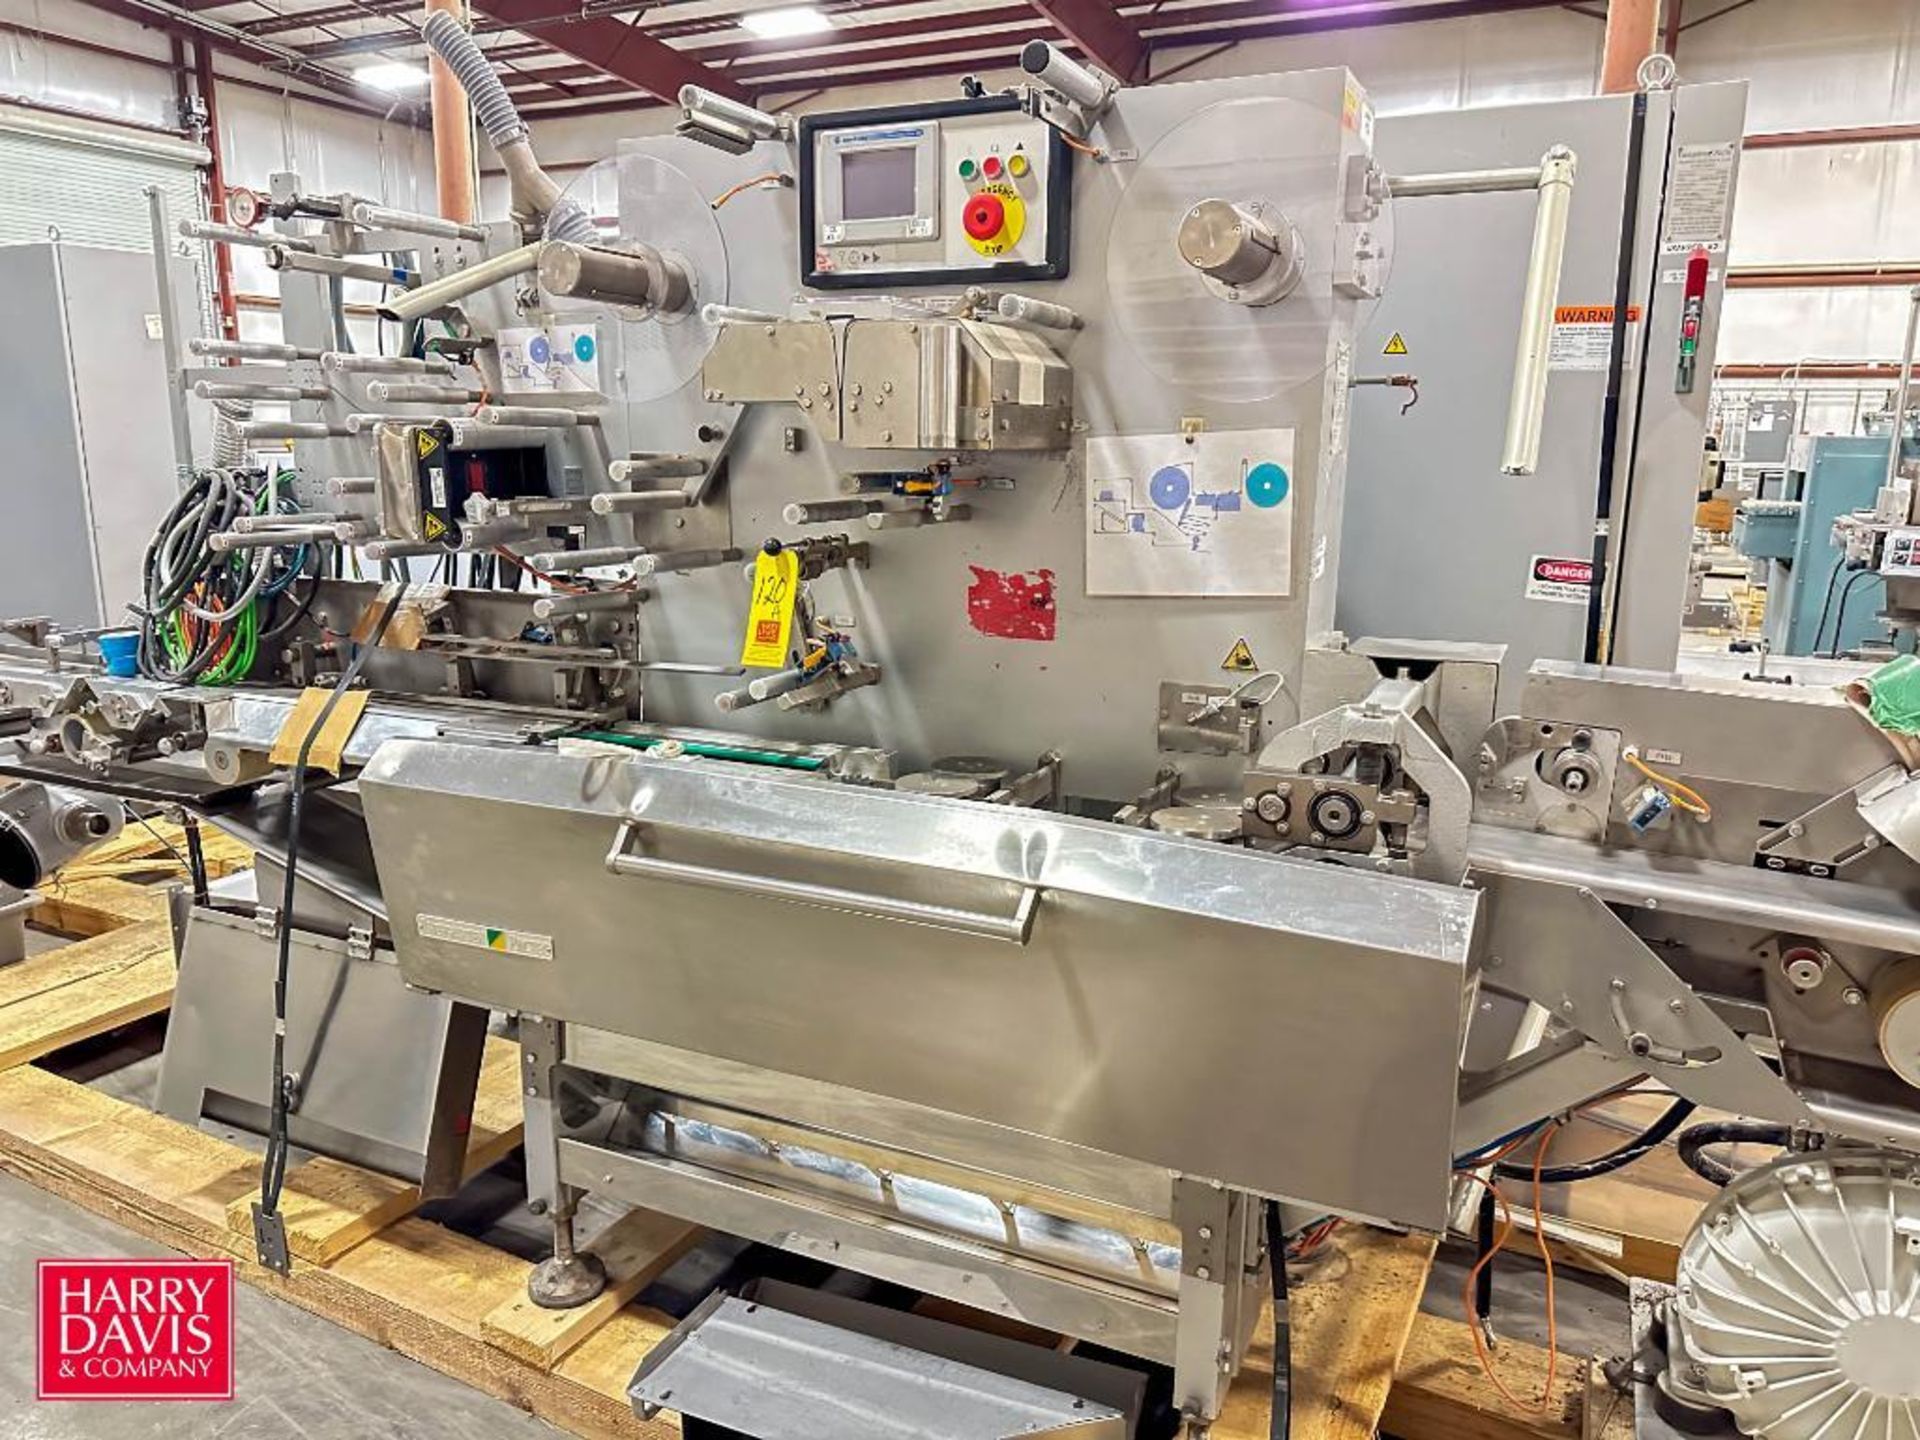 THEEGARTEN PACTEC Wrapper, Model: FPC5, S/N: FPC5004 with Vacuum Blower and Allen-Bradley PanelView - Image 2 of 4